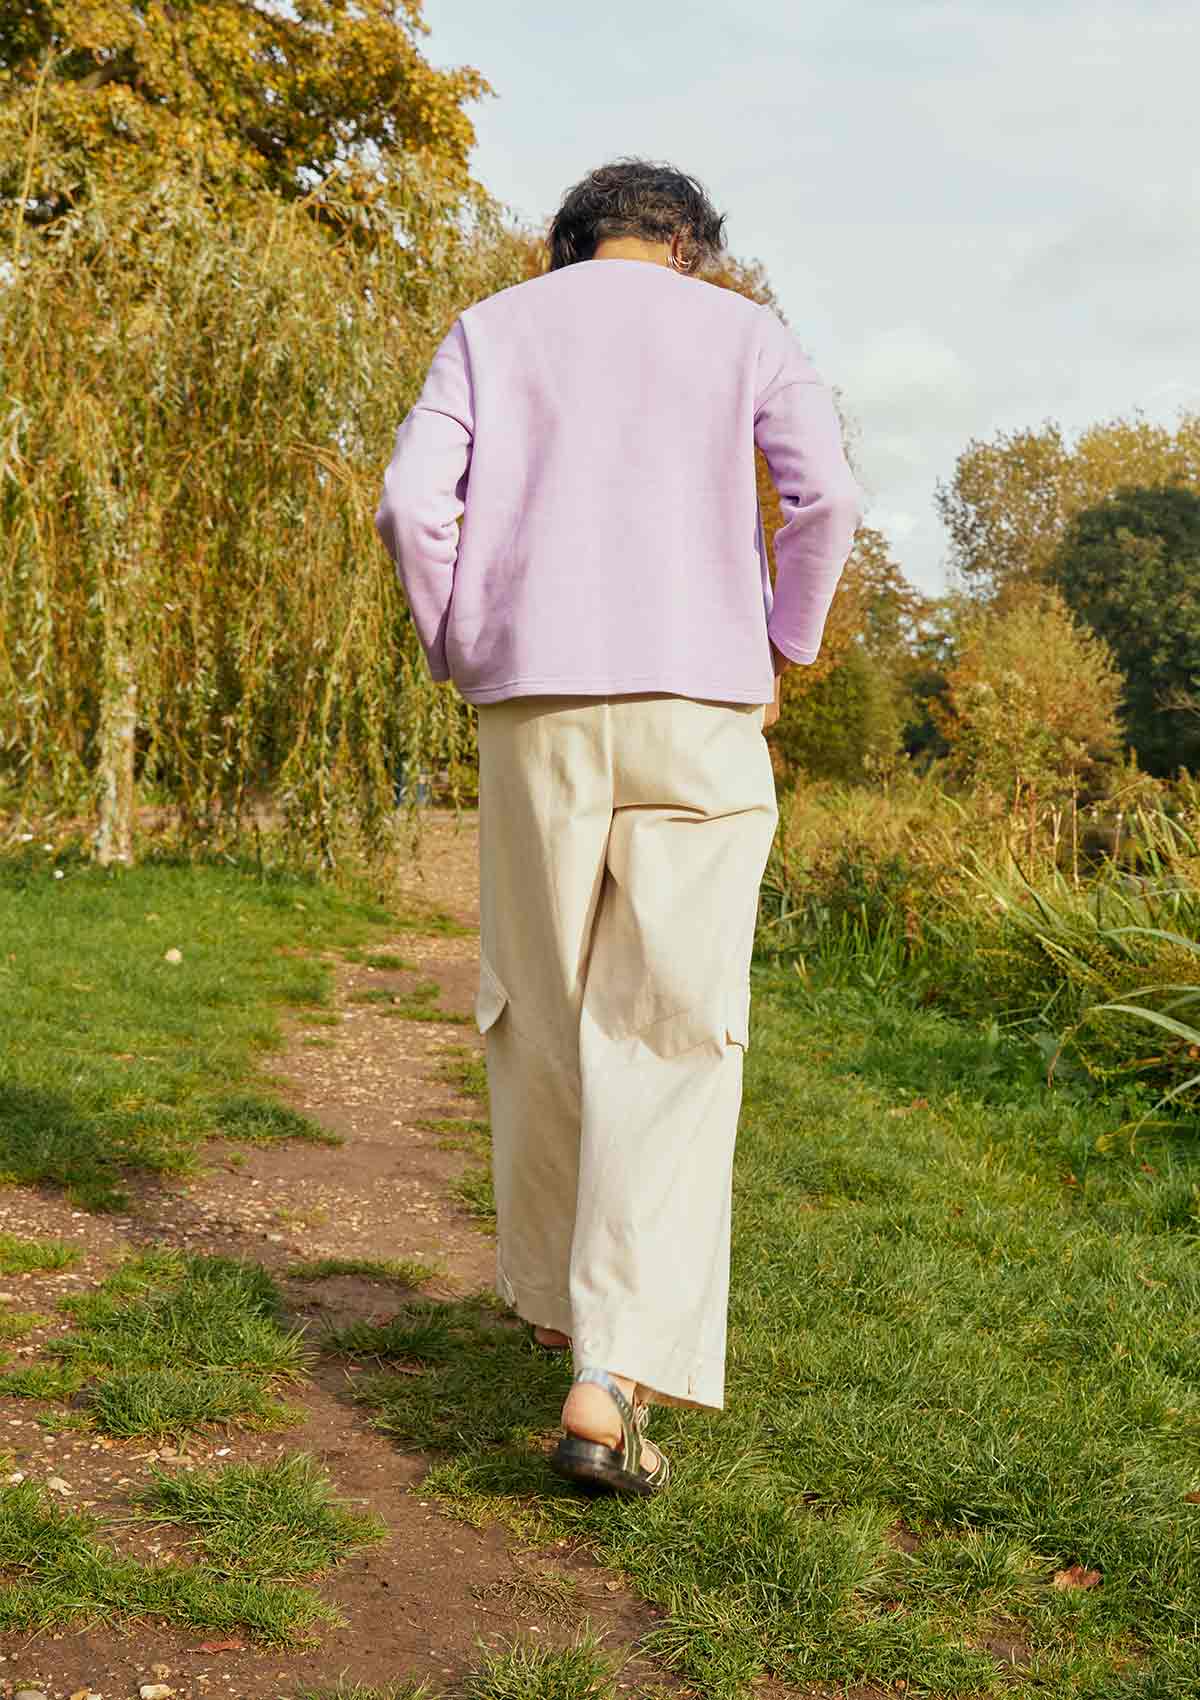 Woman walking away through a field with willows. She is wearing the Asmuss Eddy Cargo Trousers in ecru and the Asmuss Anni Sweatshirt in Lilac.